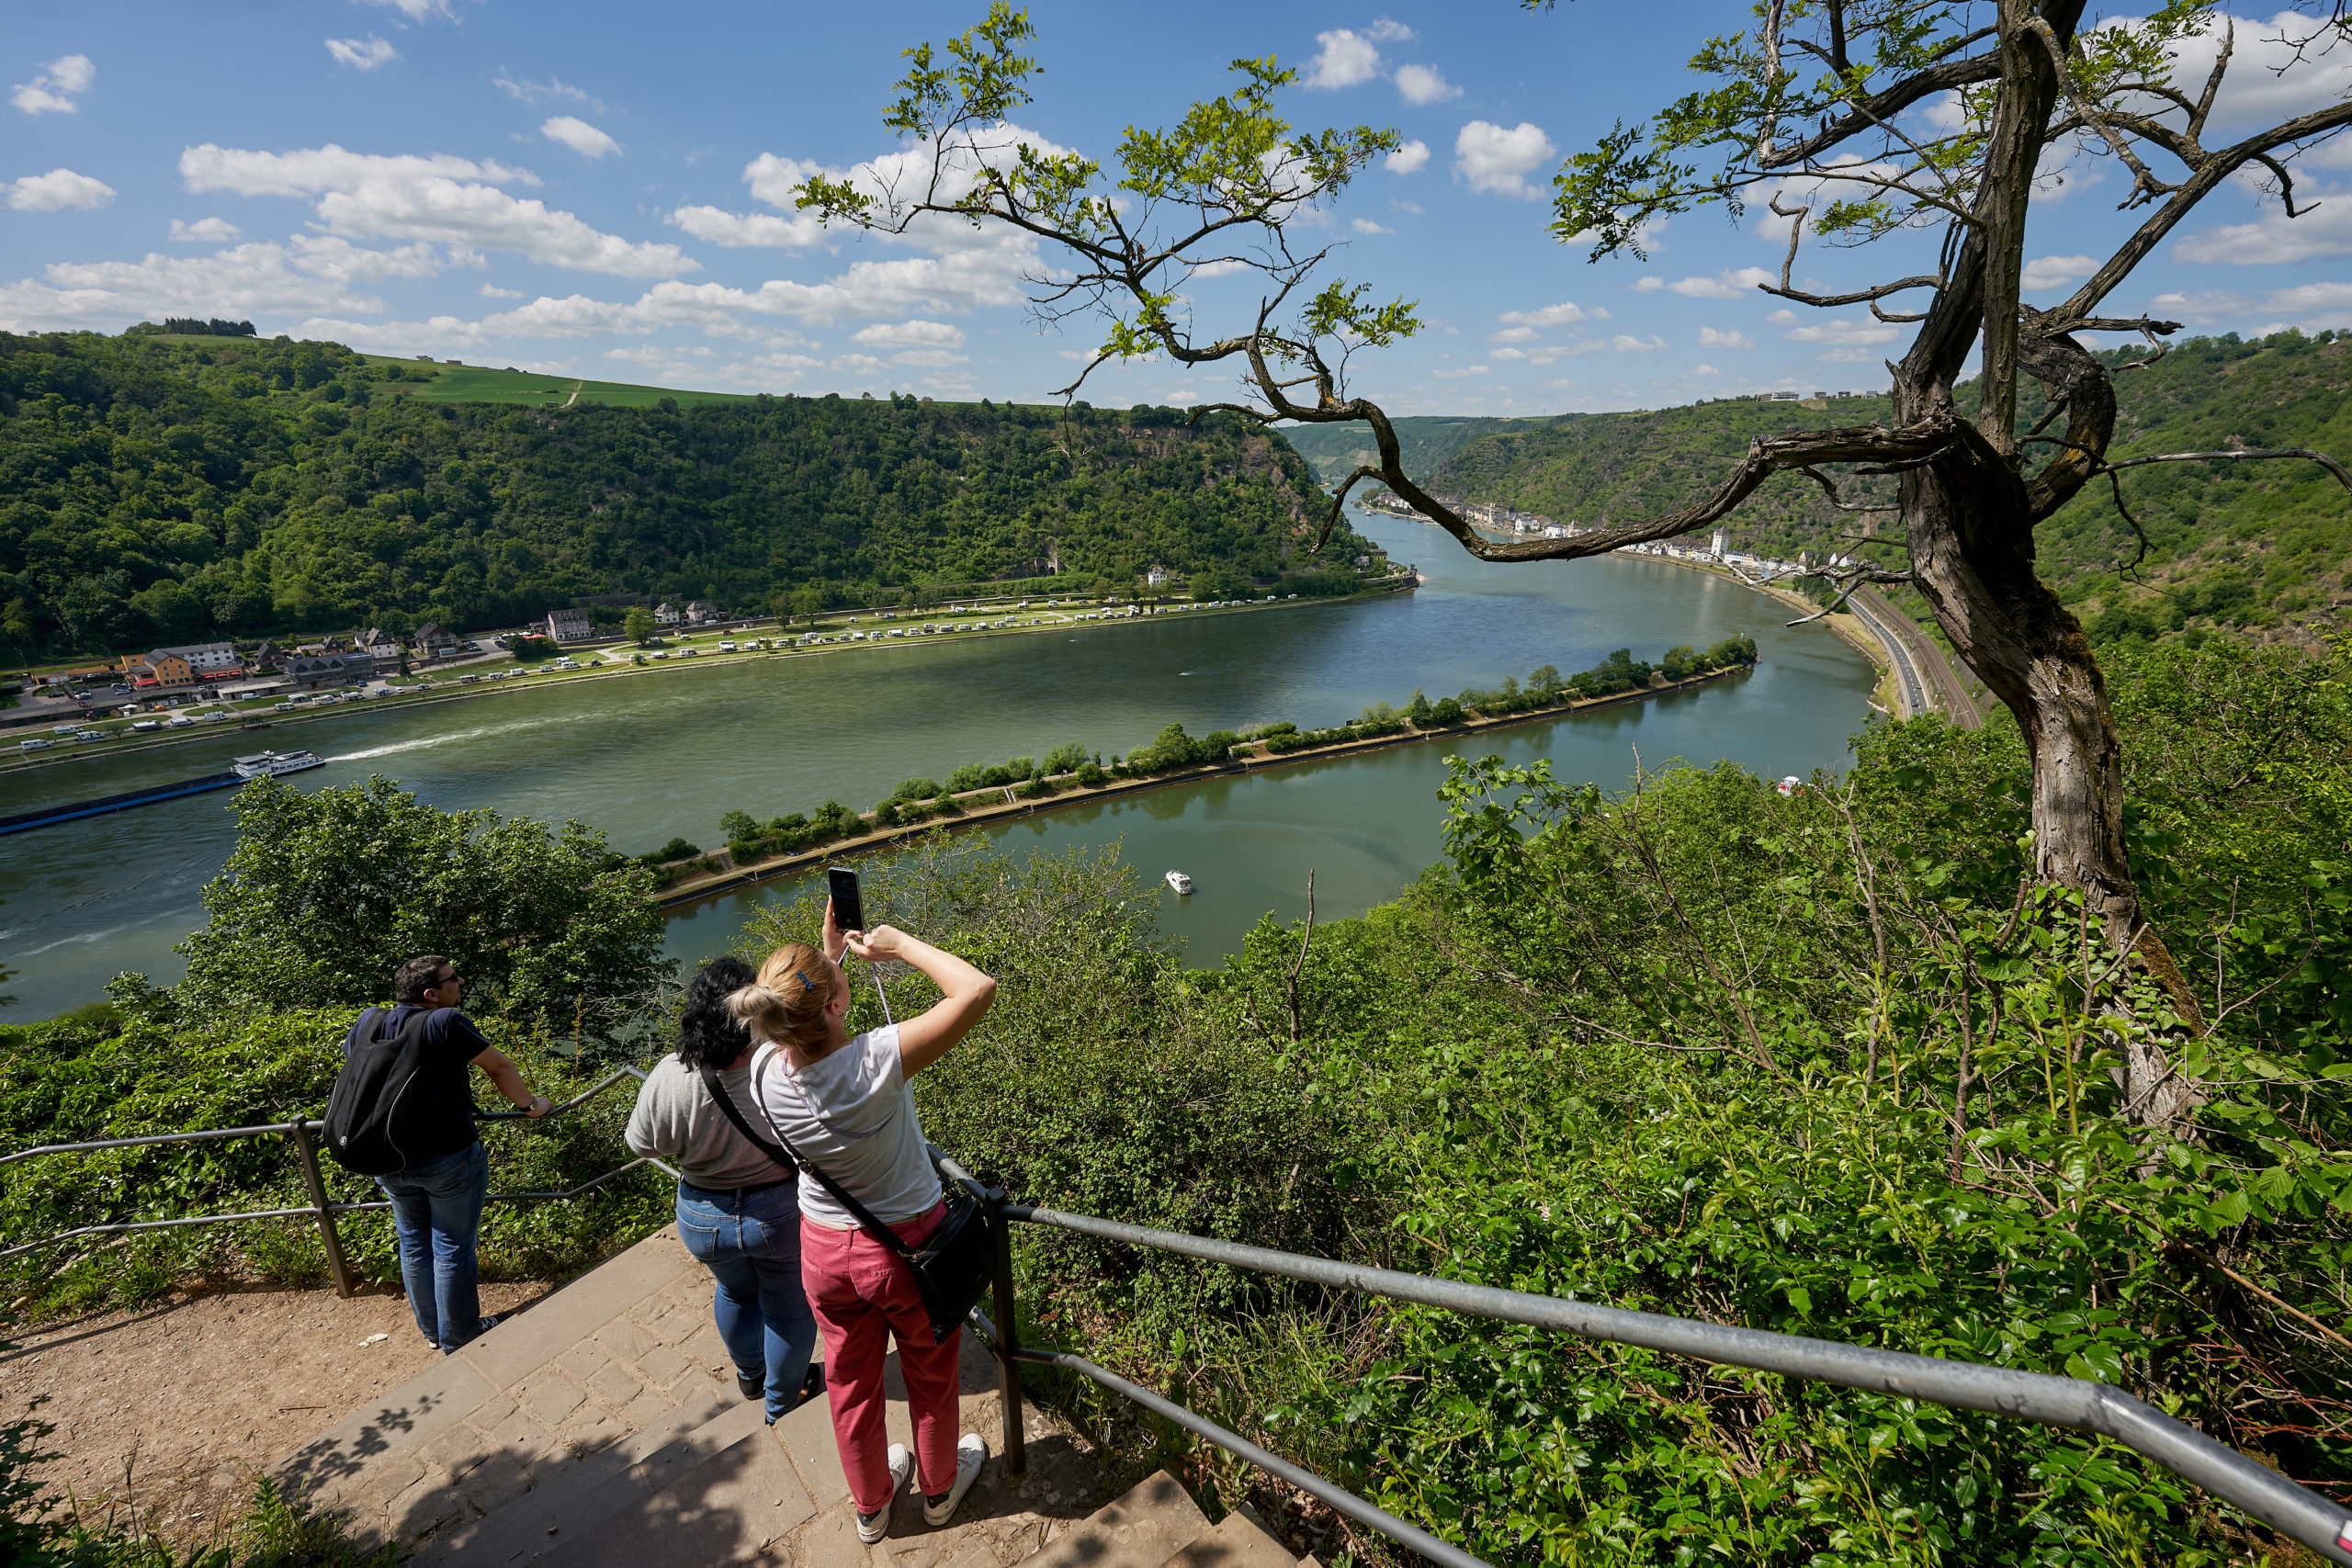 Walkers stop to enjoy the view from the Loreley Plateau along the Rhine